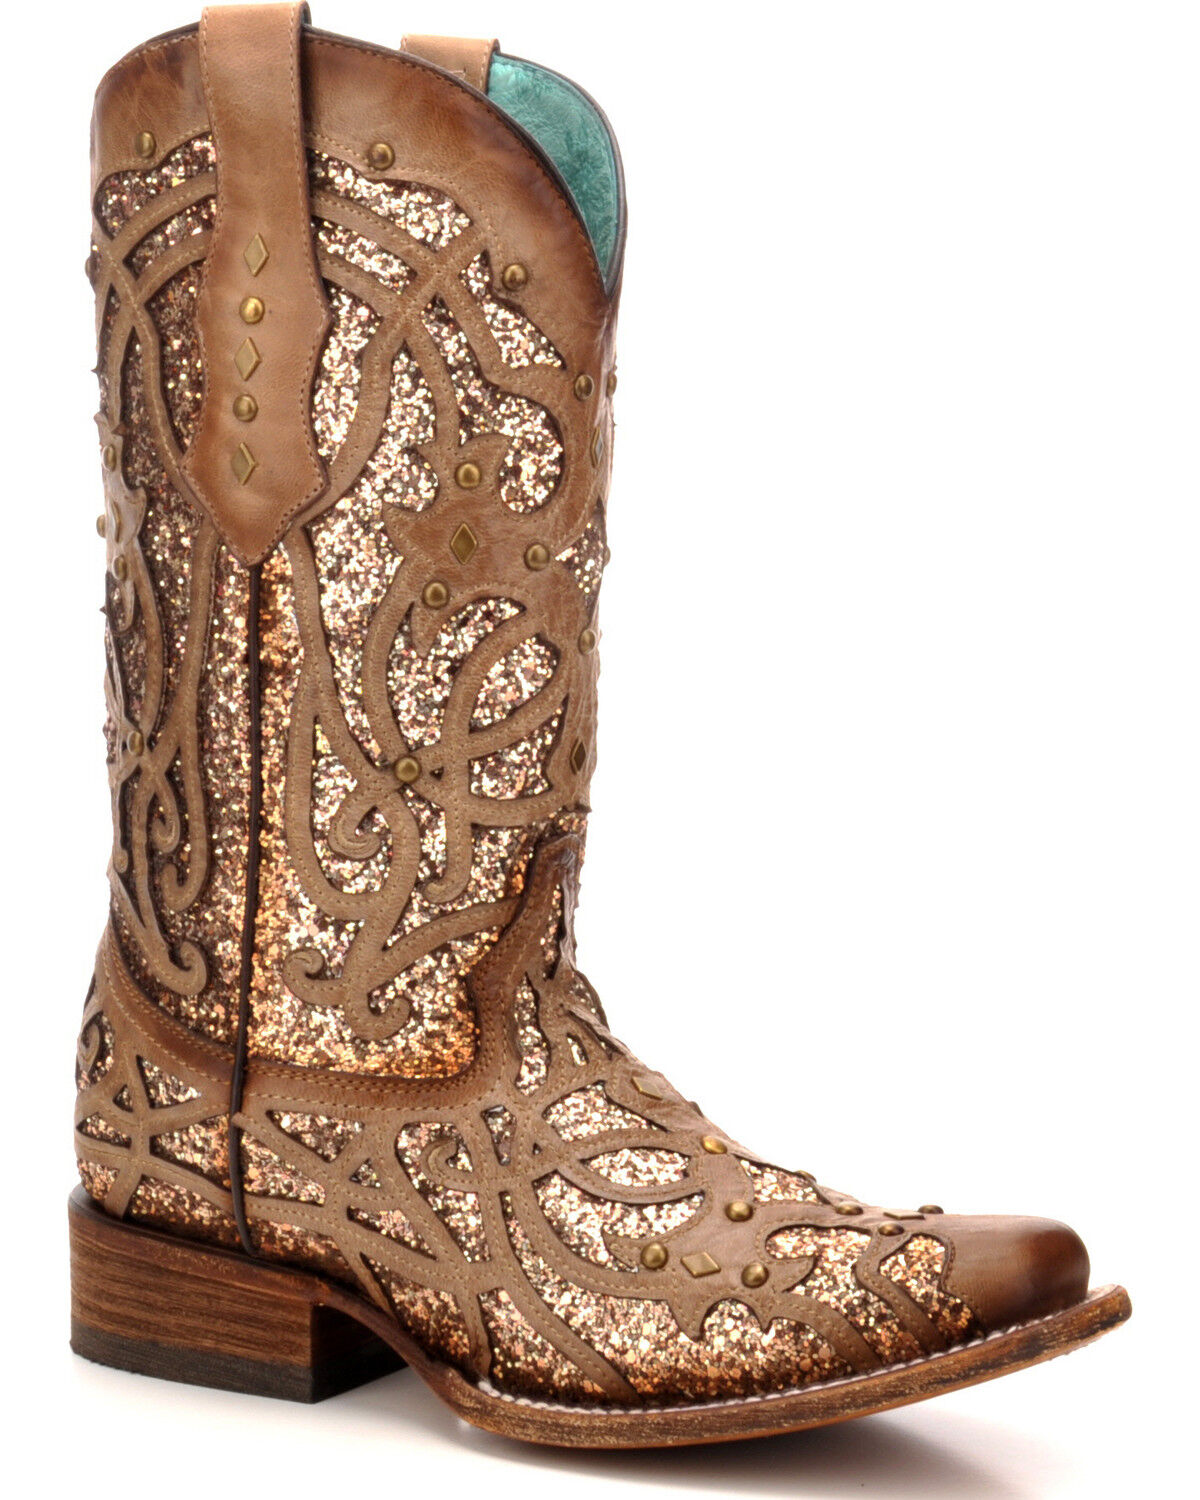 Corral Boots: Cowgirl Boots \u0026 Men's 